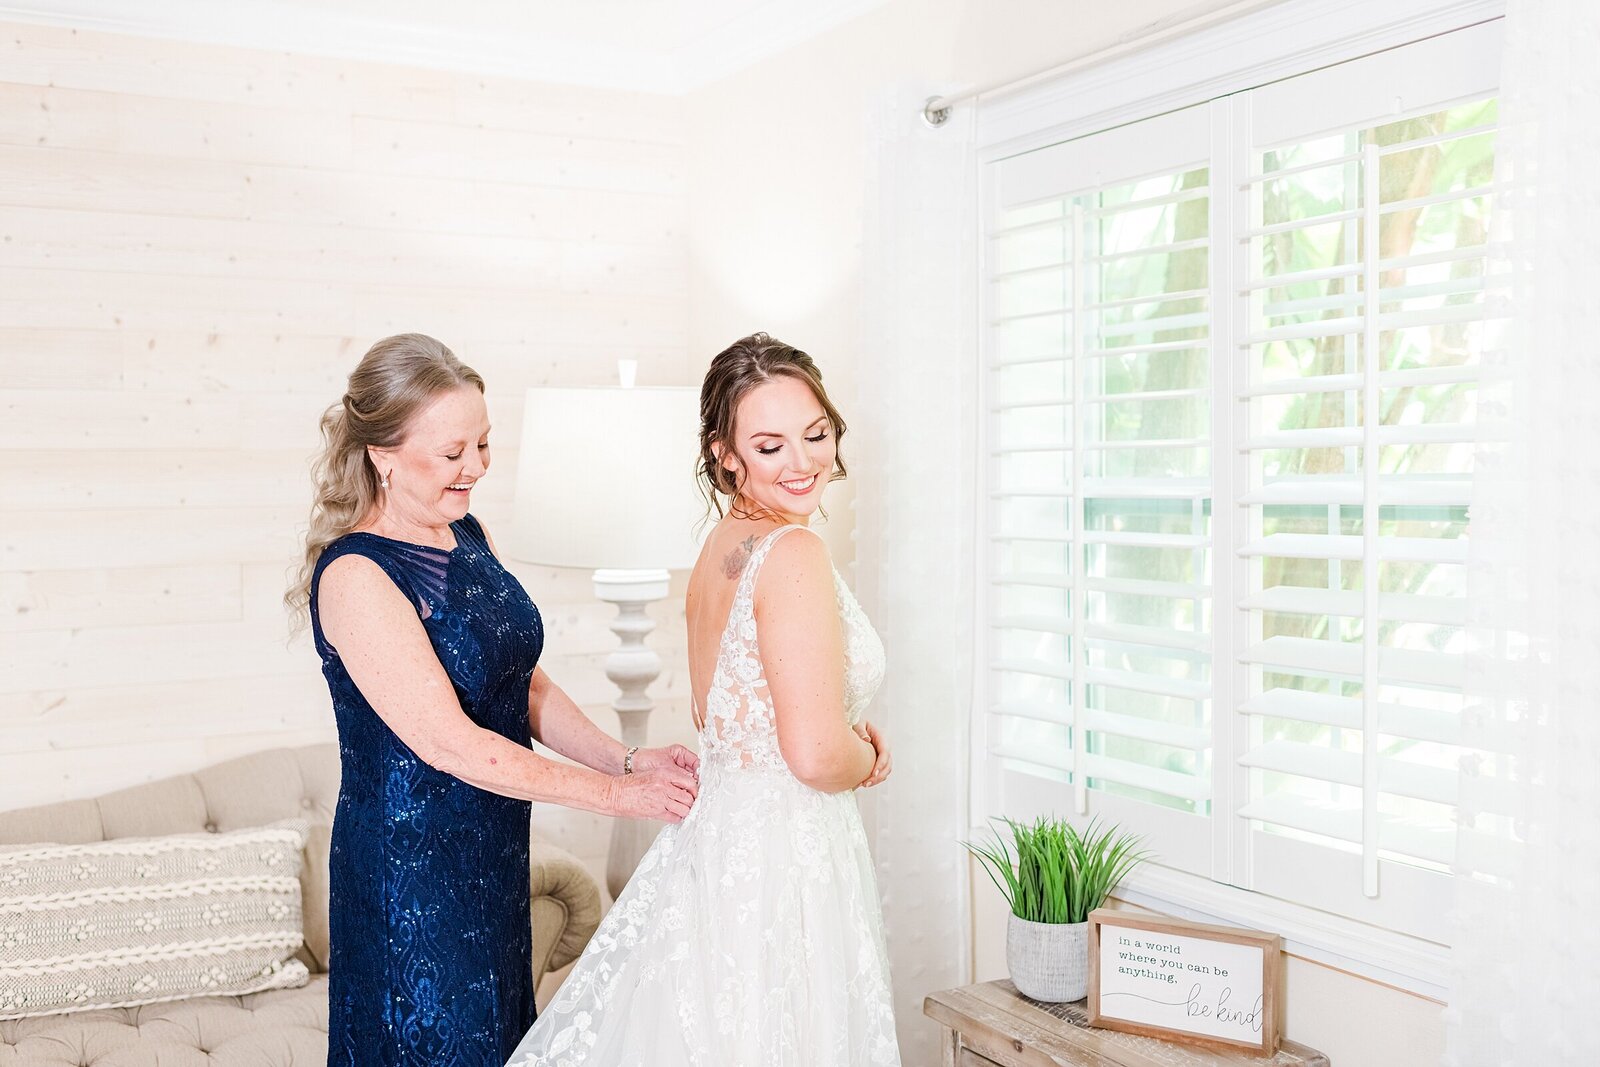 Bride getting ready | The Delamater House Wedding | Chynna Pacheco Photography-149